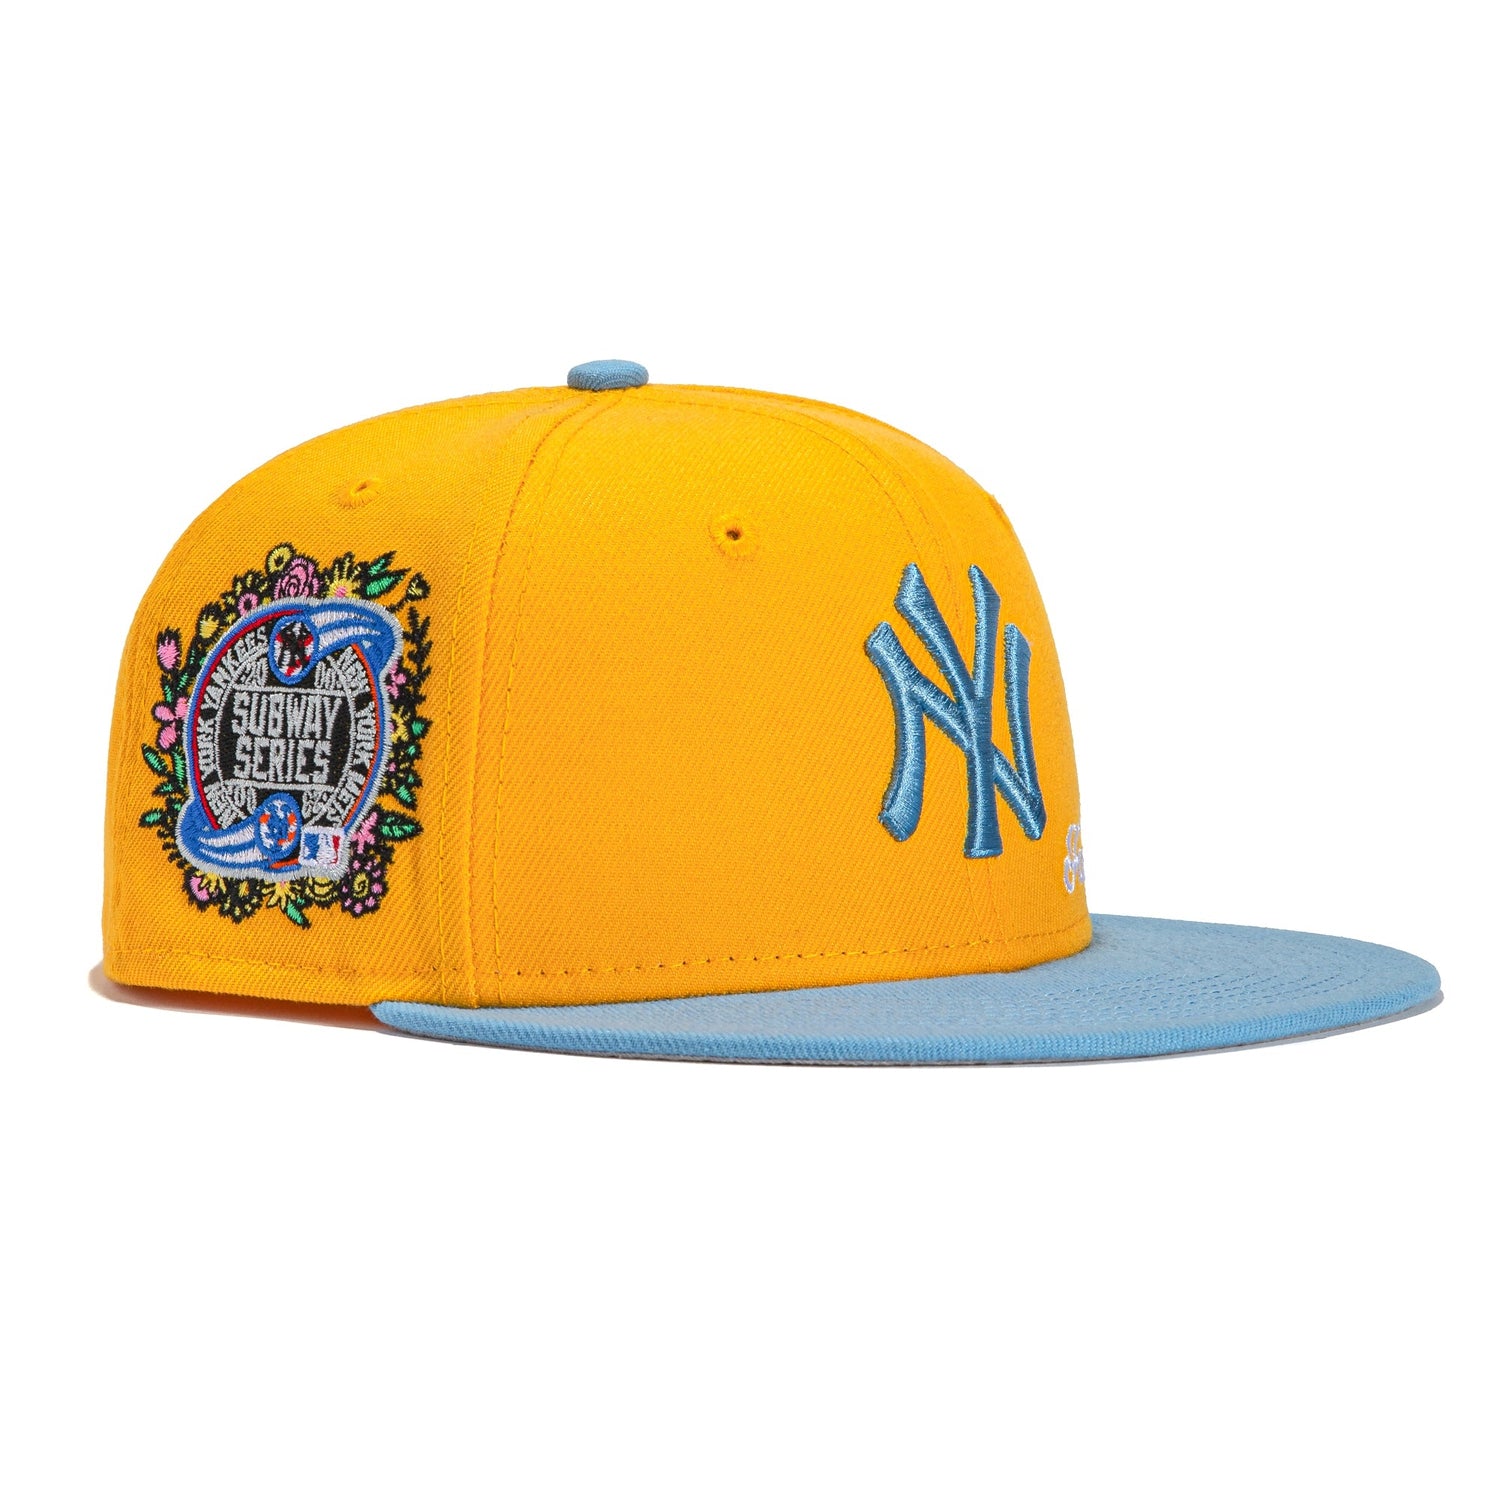 New York Yankees New Era 5950 Basic Fitted Hat - Blue/Gold